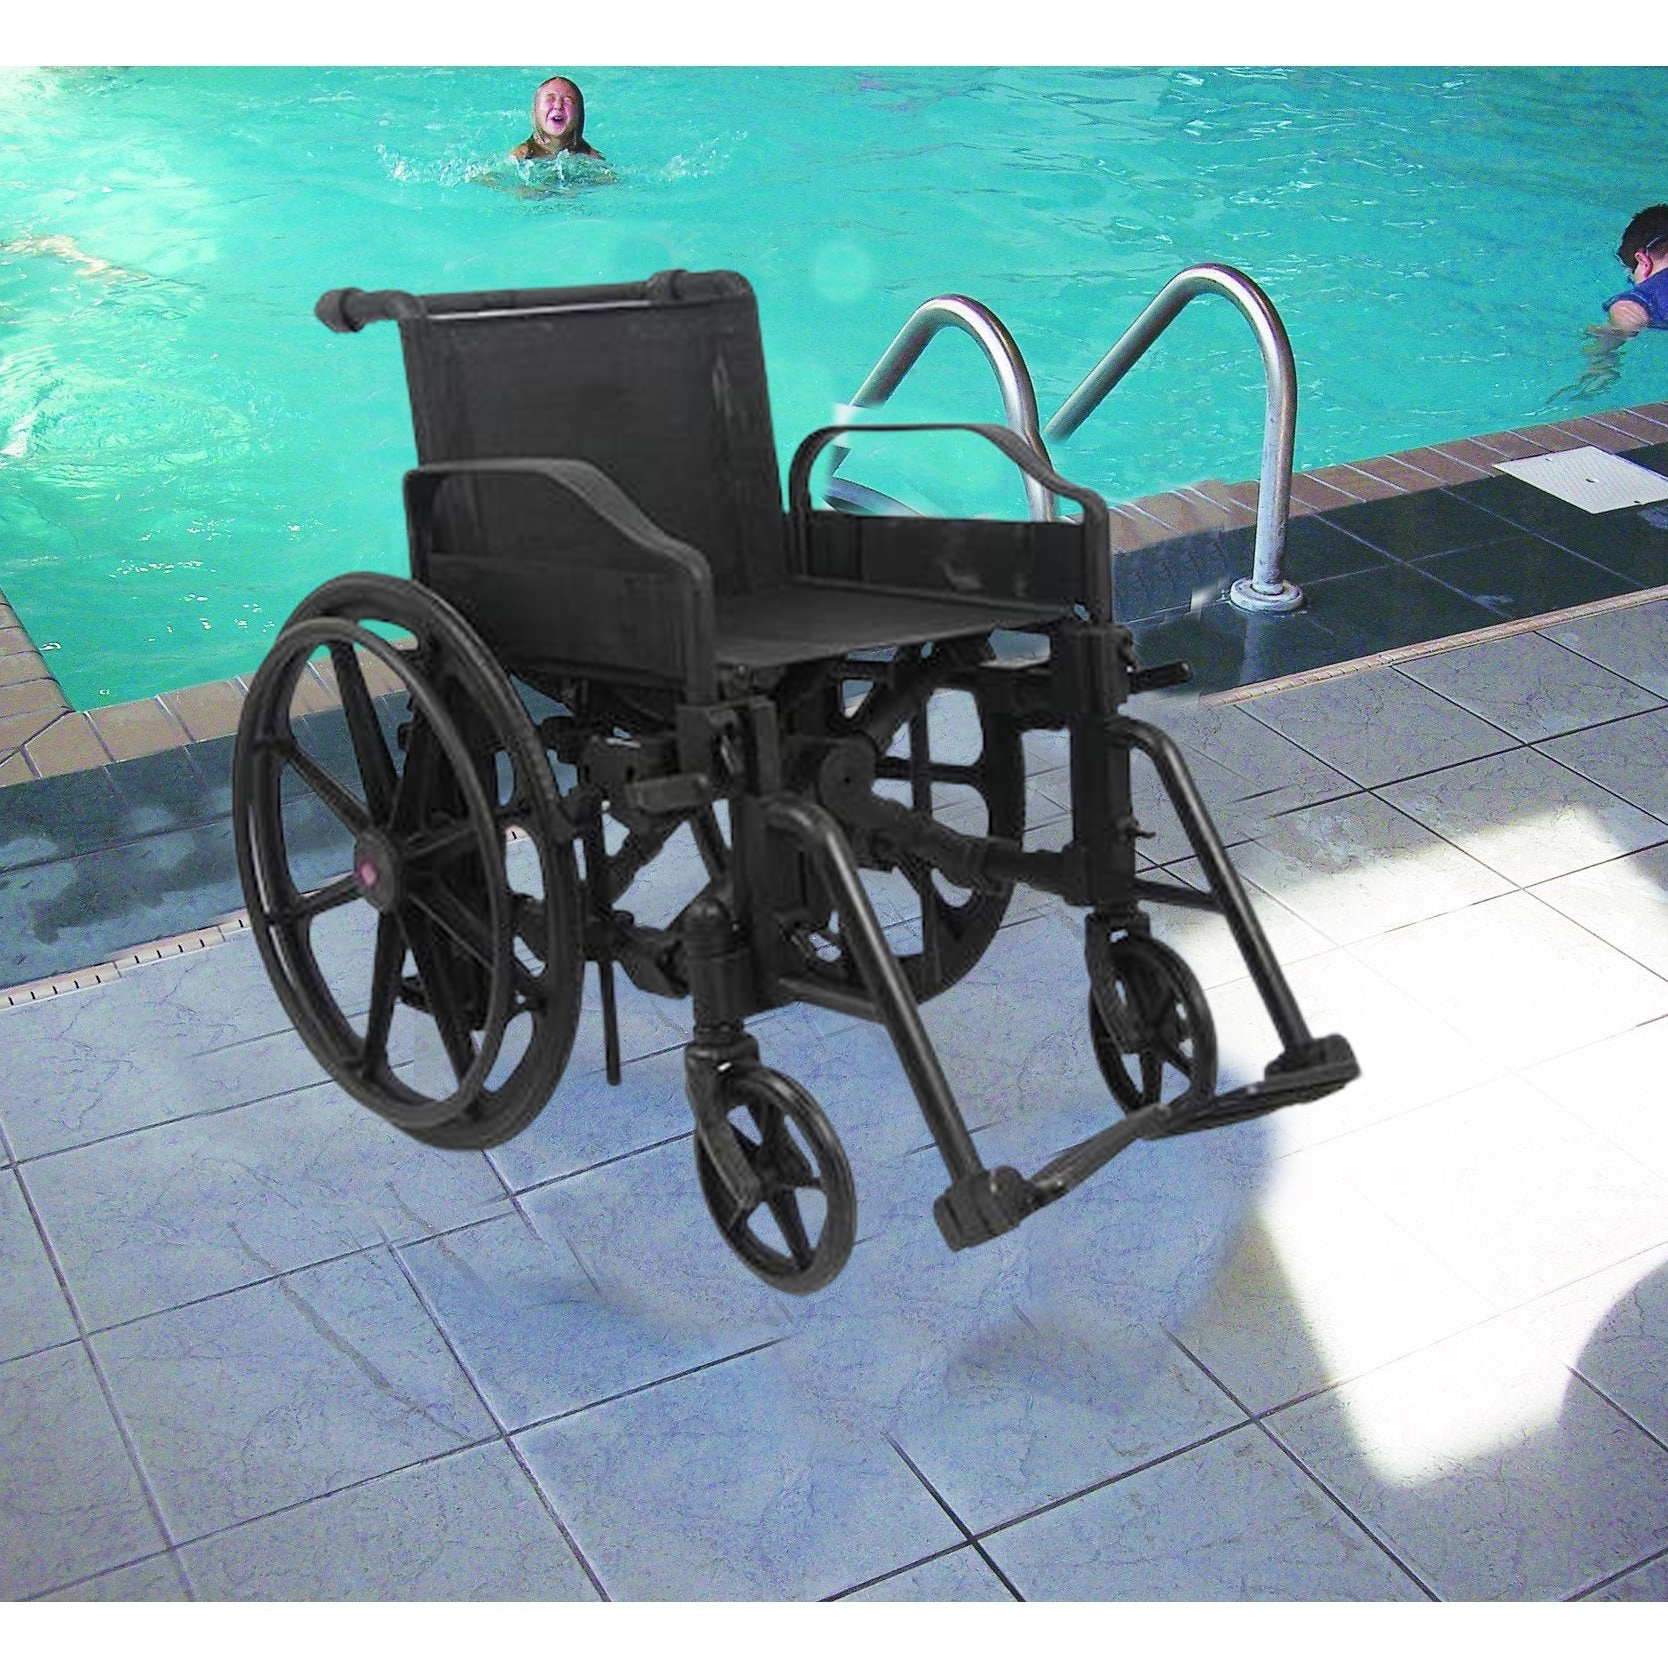 Hydrotherapy pool disabled access wheelchair